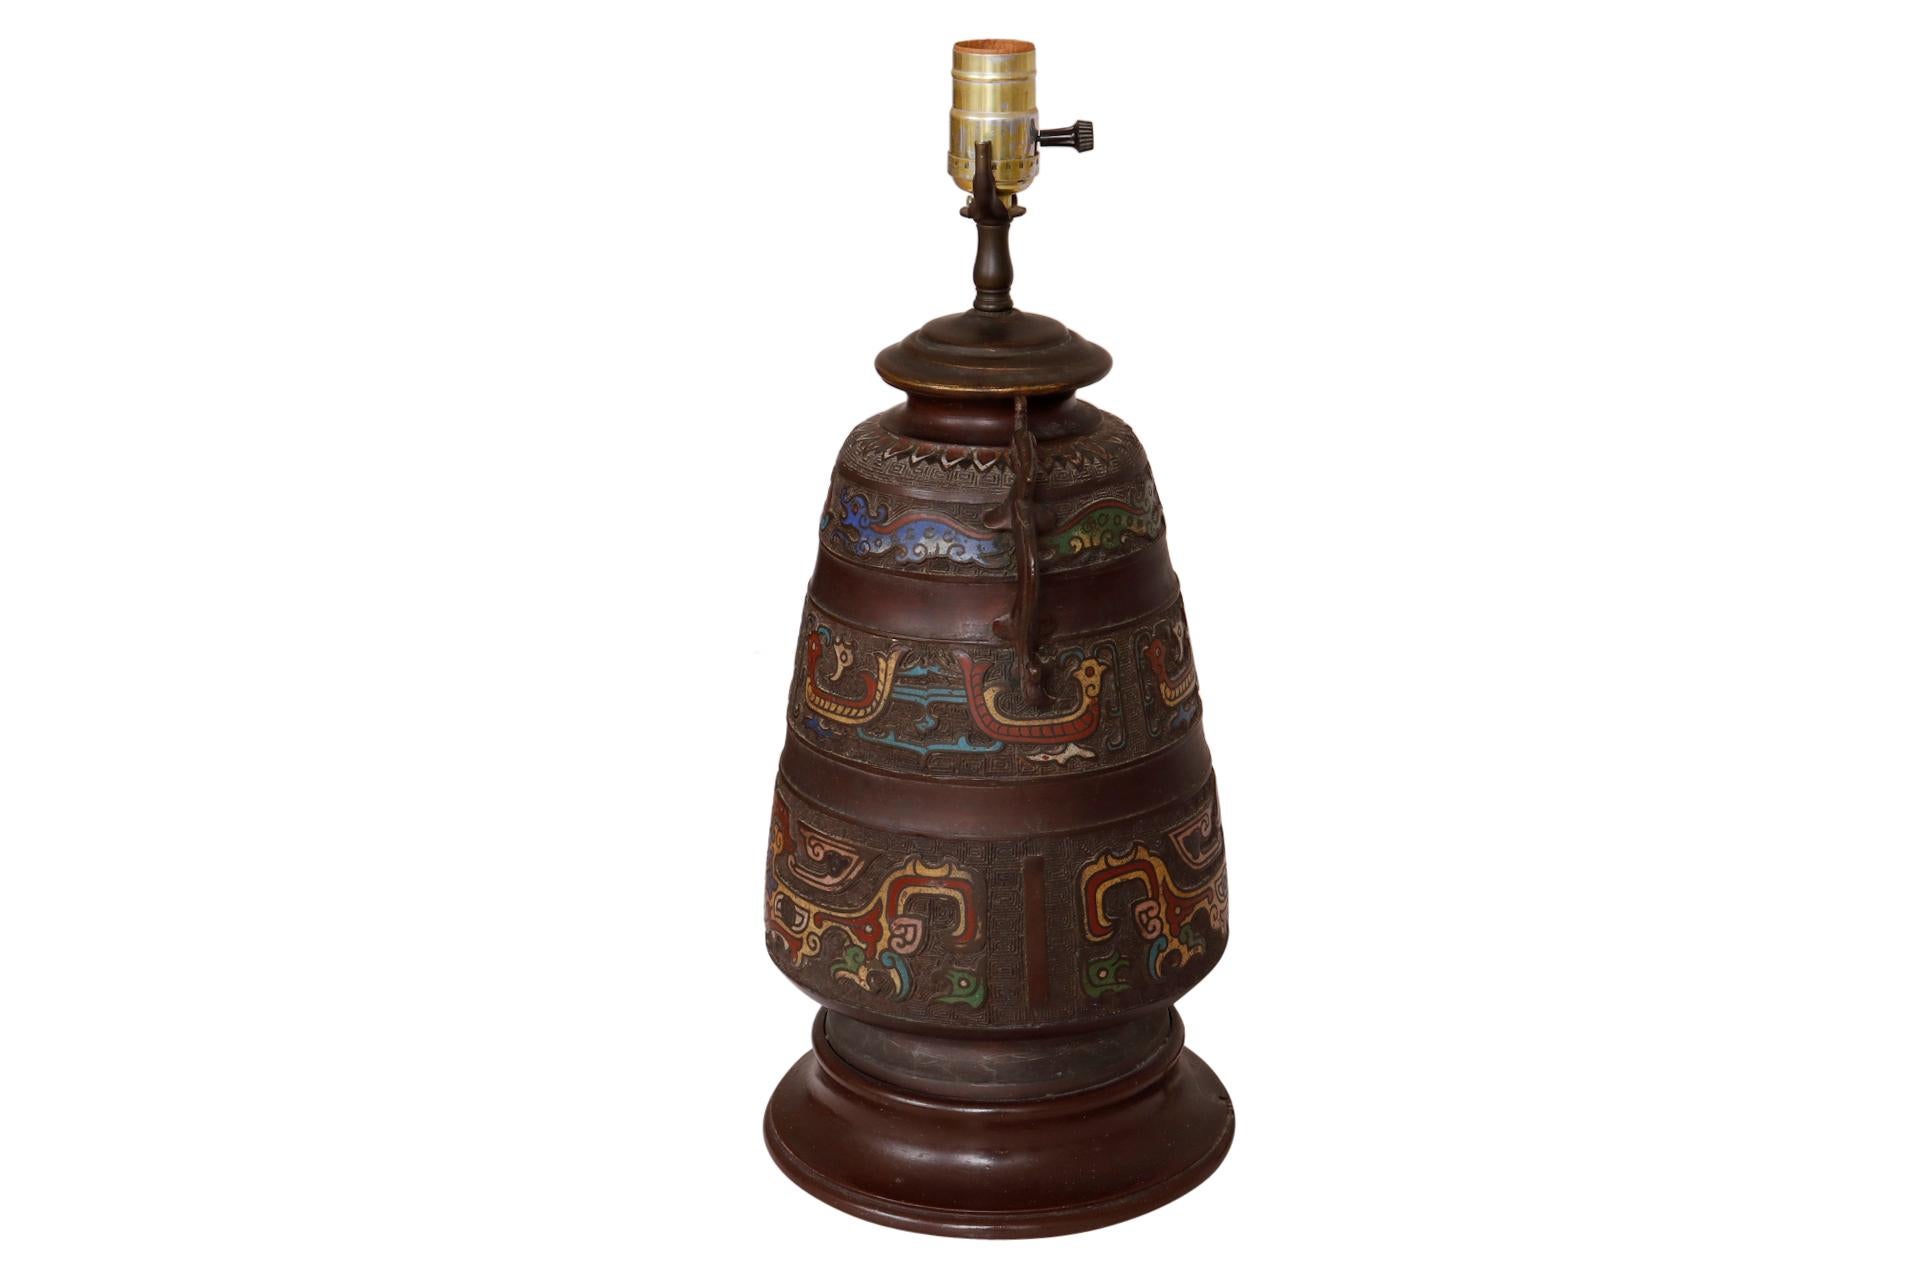 An Aztec inspired table lamp made of metal. Decorated throughout with finely cast pictorial animals in bold enamels in primary colors. Tapers upward with dragon like handles at the shoulder.